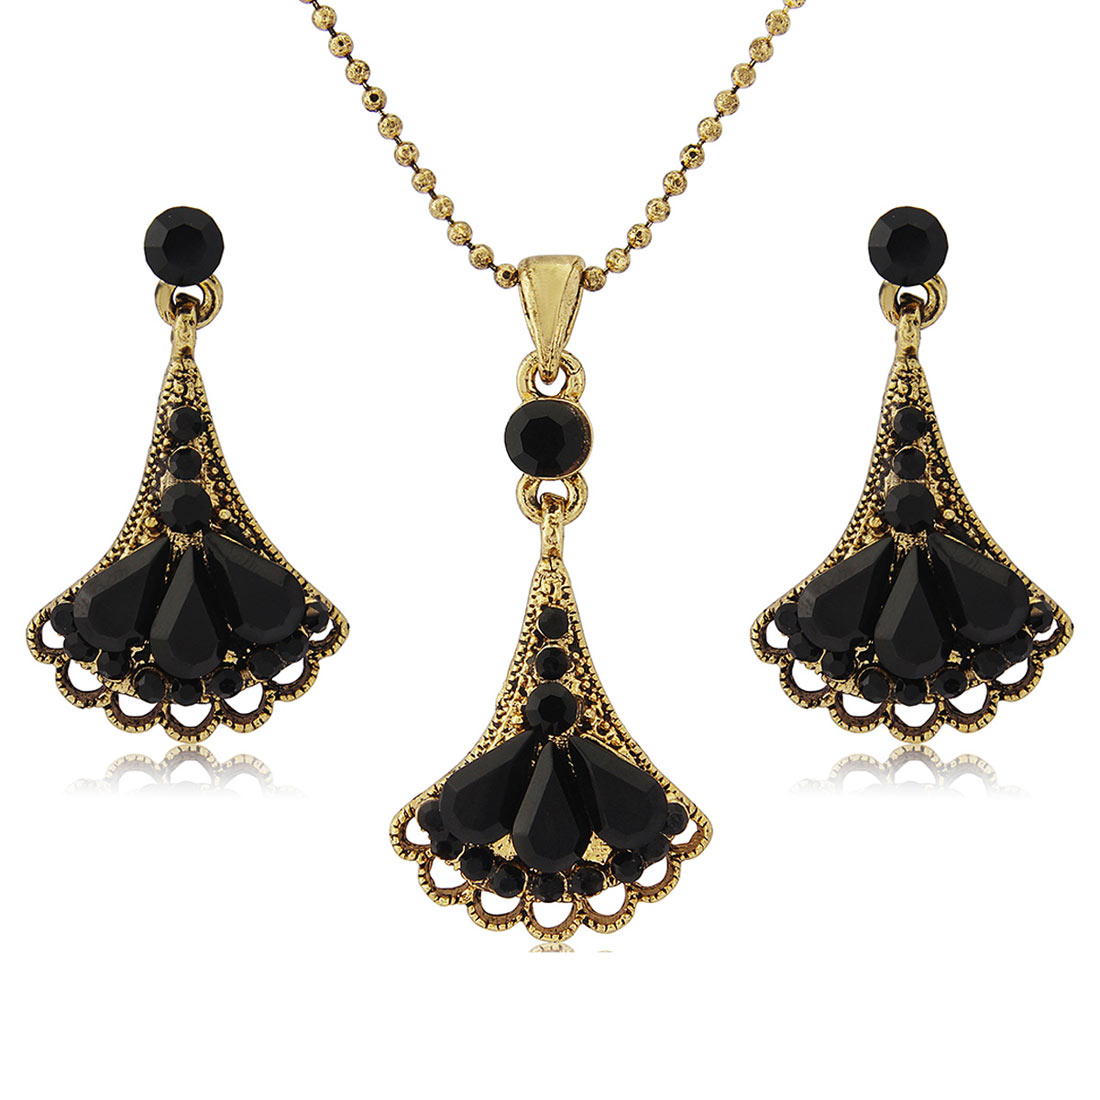 Decadence of Deco Black & Gold Necklace & Earrings Jewellery Set